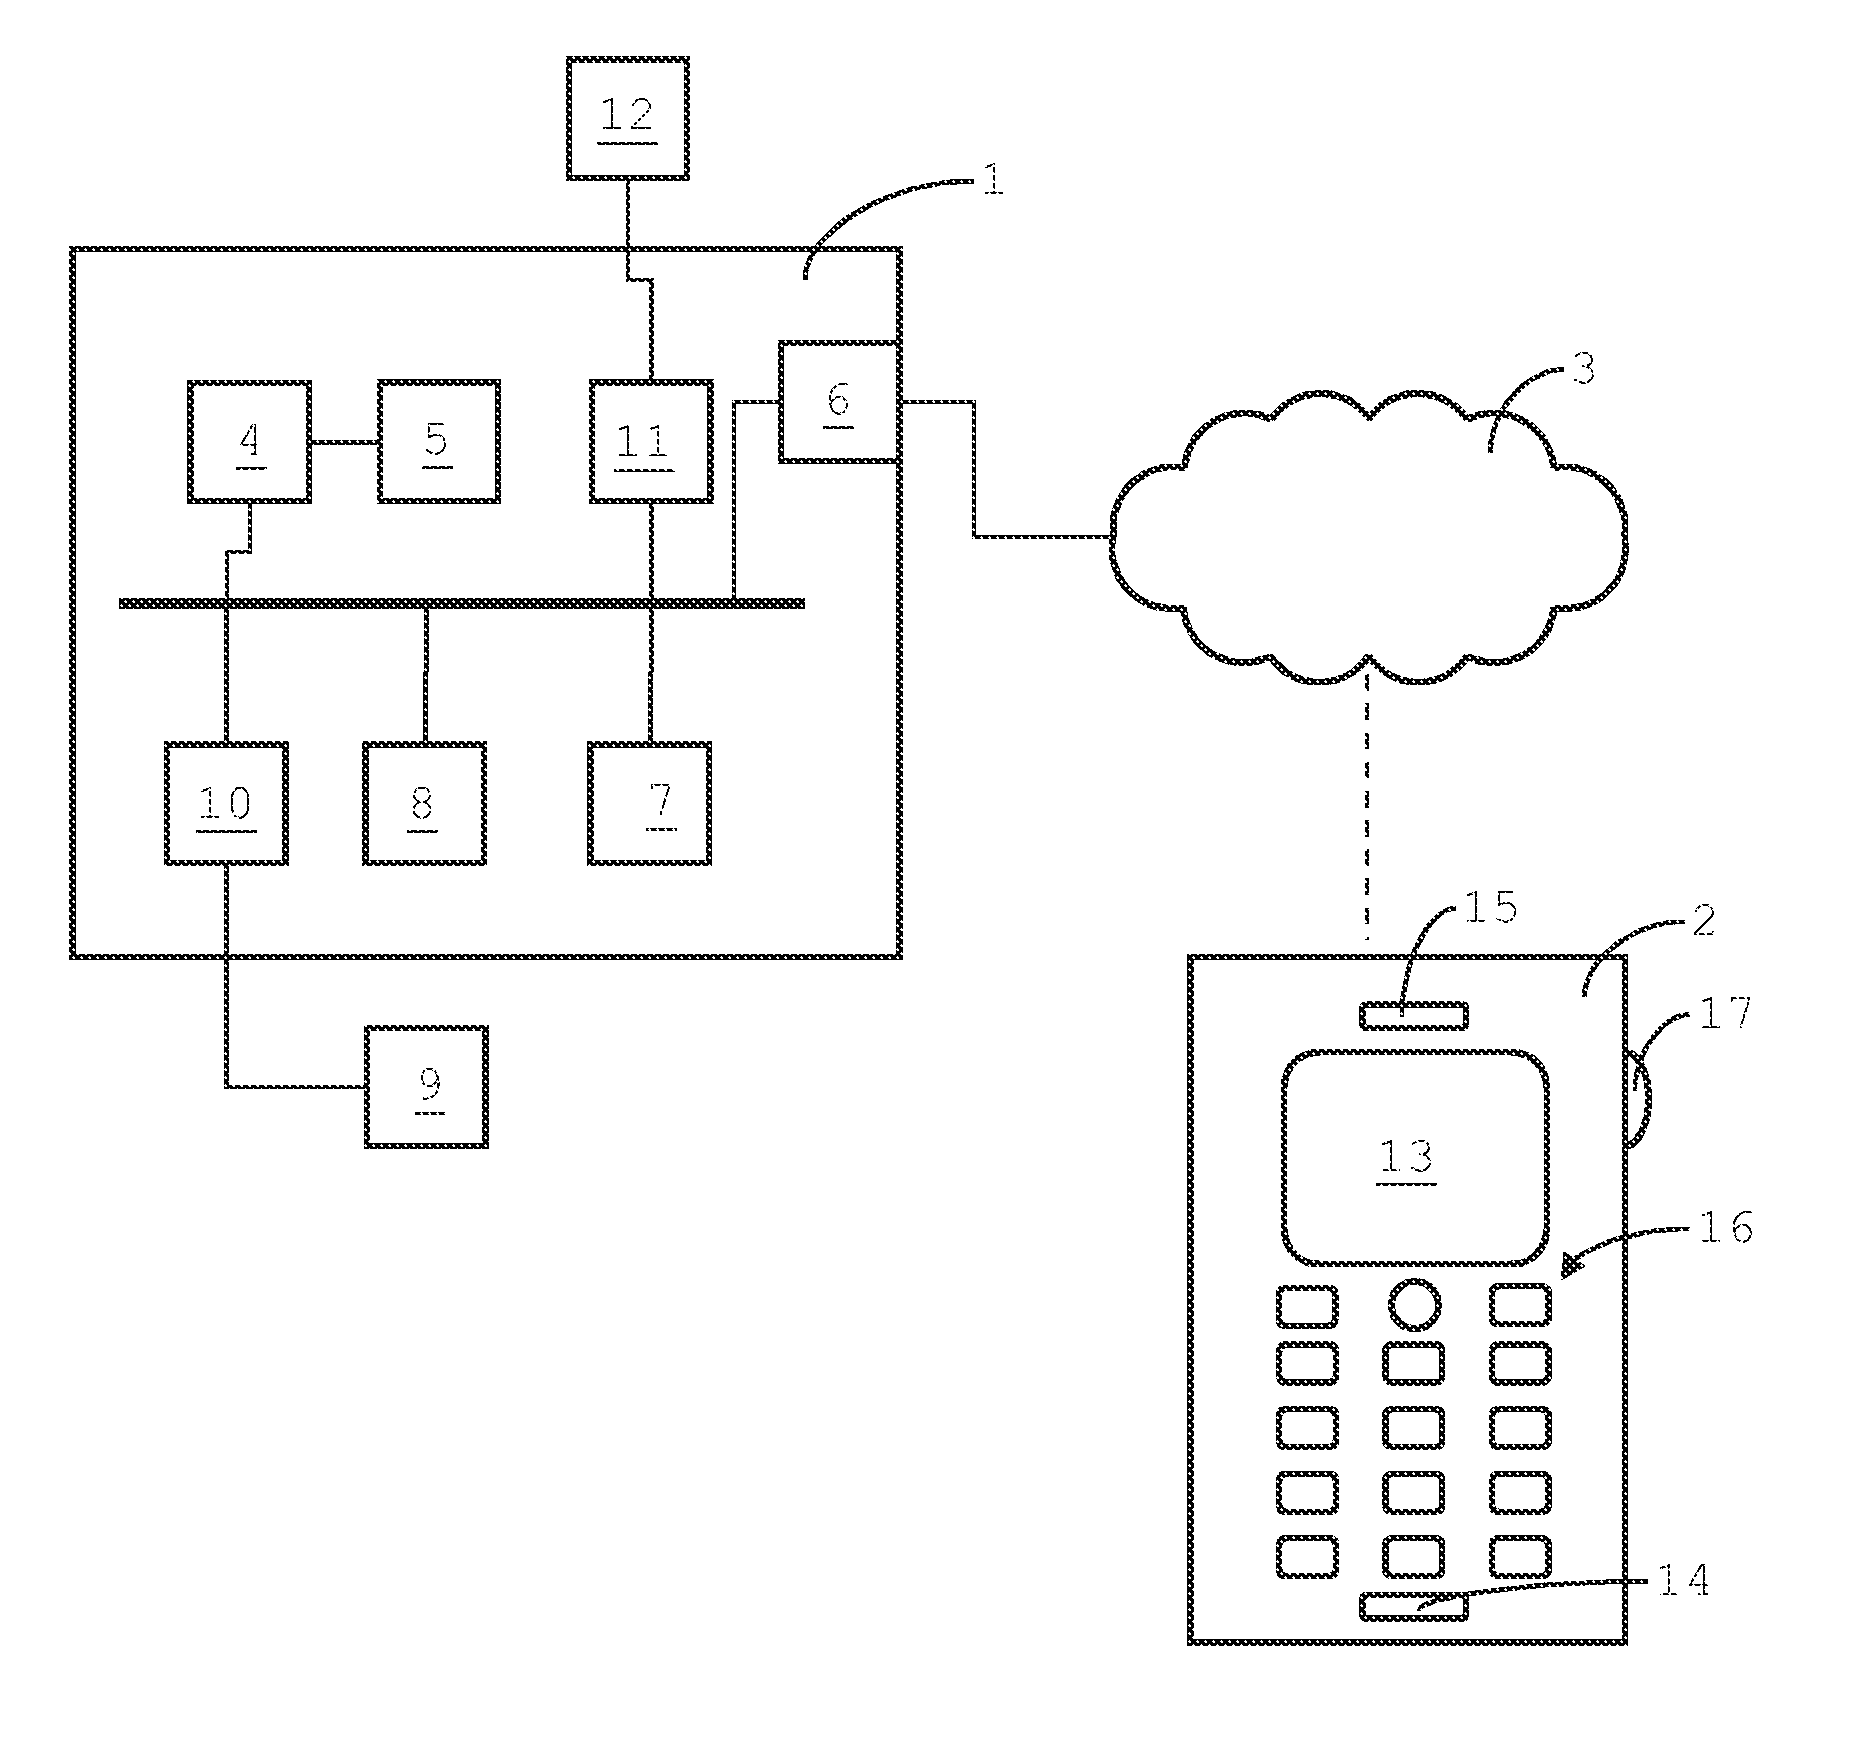 Method and system for adapting communications